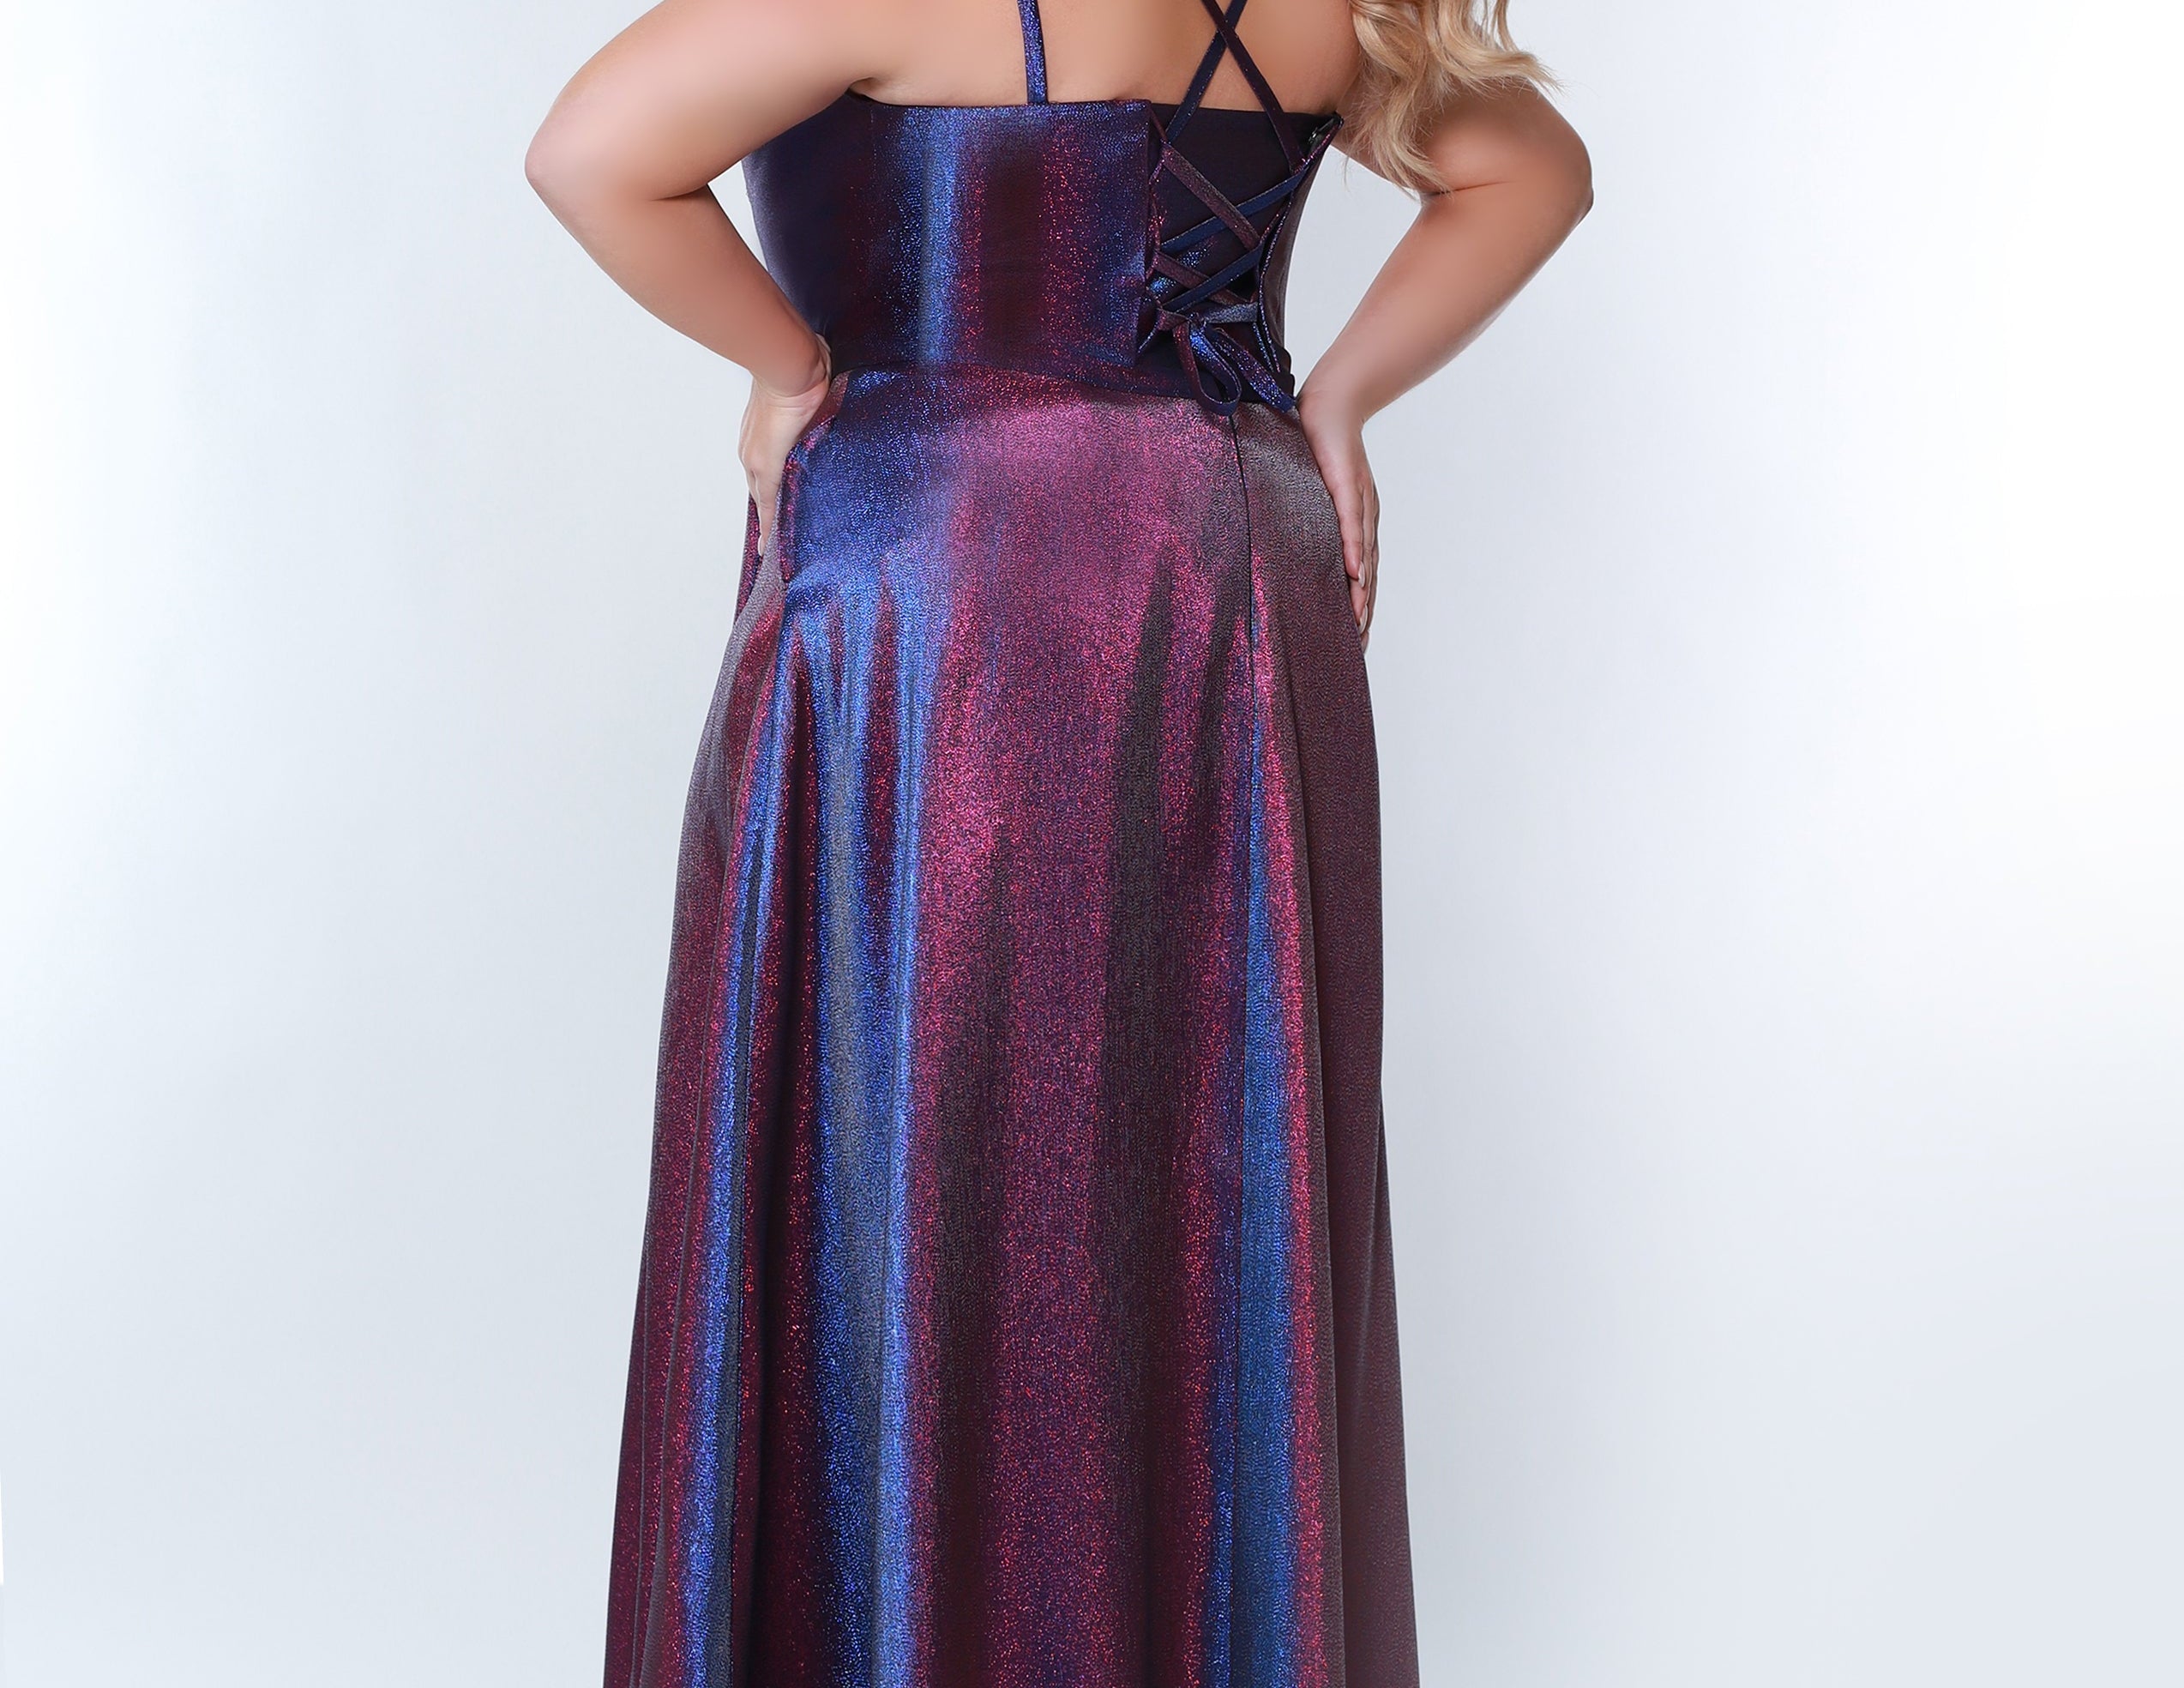 Sydney’s Closet SC7344  Shimmer satin in purple. A-line silhouette, double straps and a scoop neckline. Natural waist, lace up back with modesty panel. A-line skirt with pockets and left leg slit. 